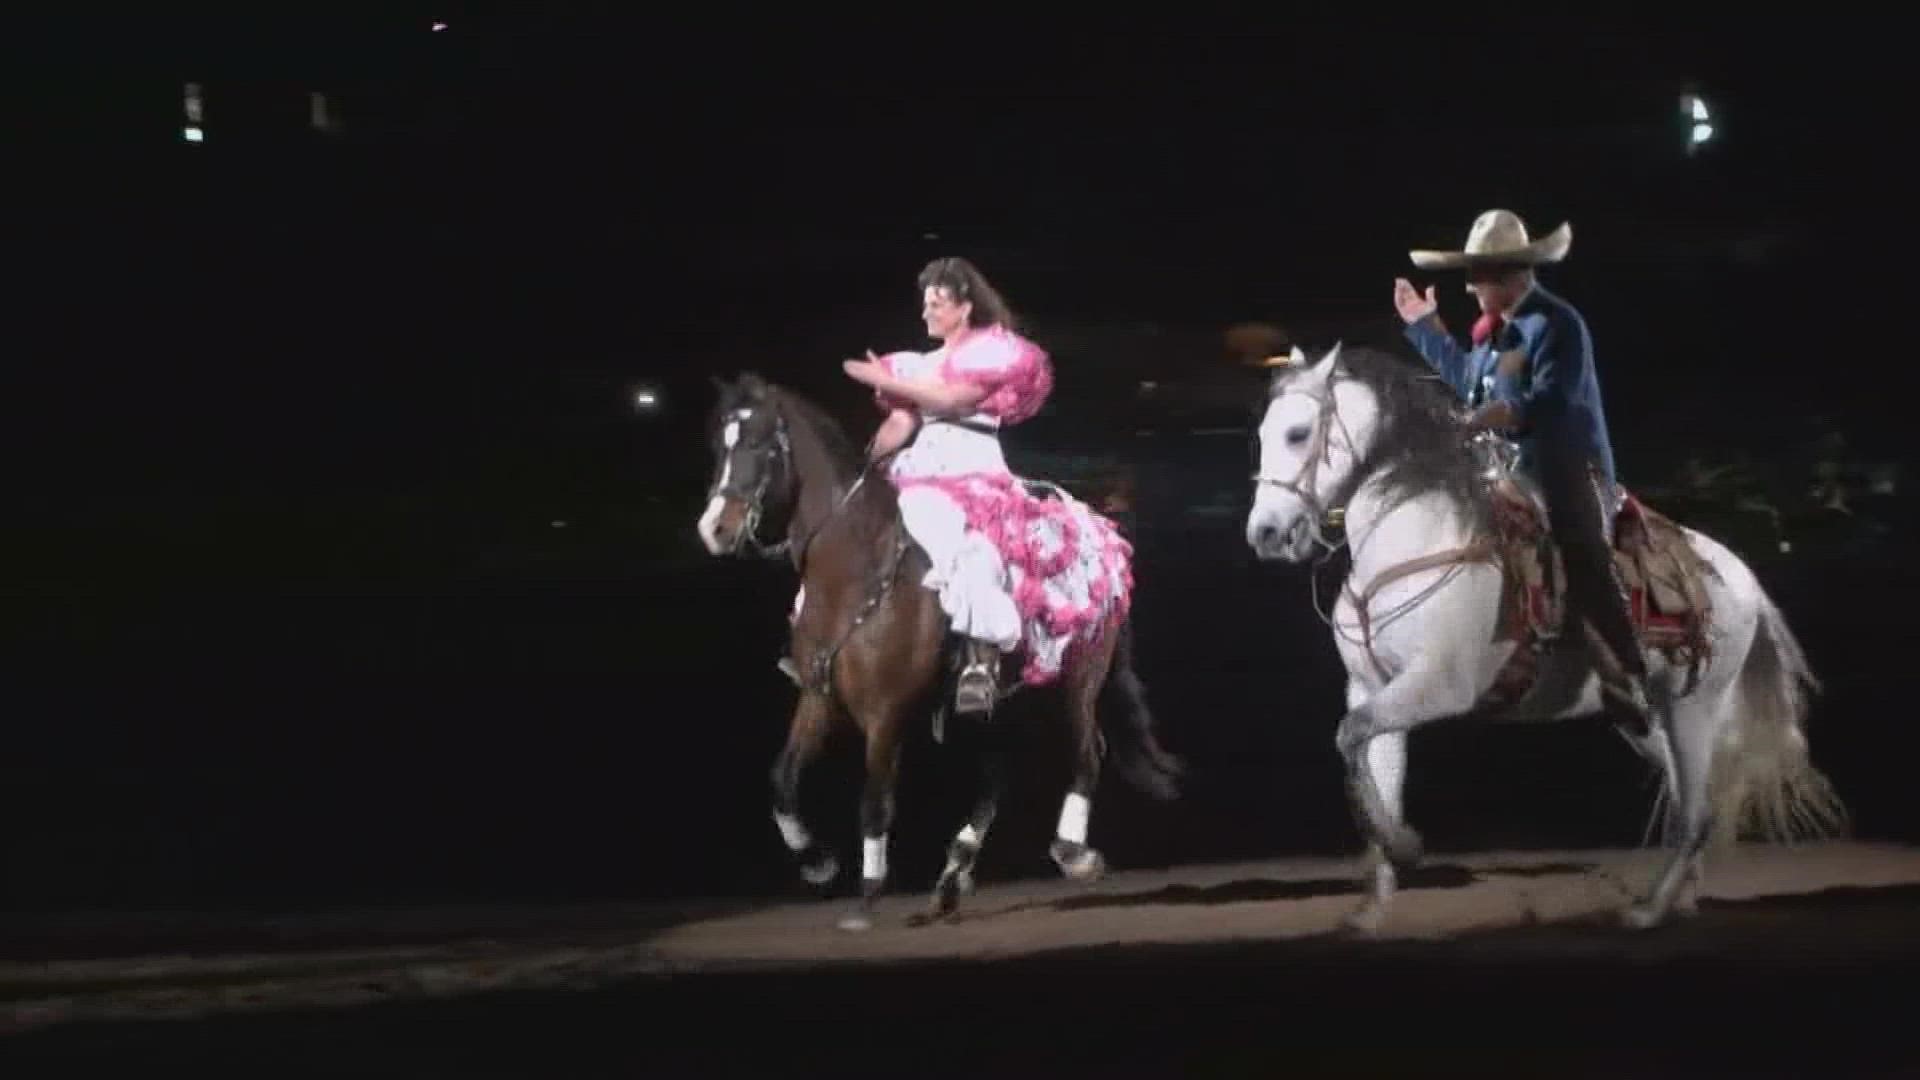 Filled with cultural pageantry, the Mexican Rodeo Extravaganza features Mexican-style bull riding, bareback riding, Mariachi music, side saddle girls and more.